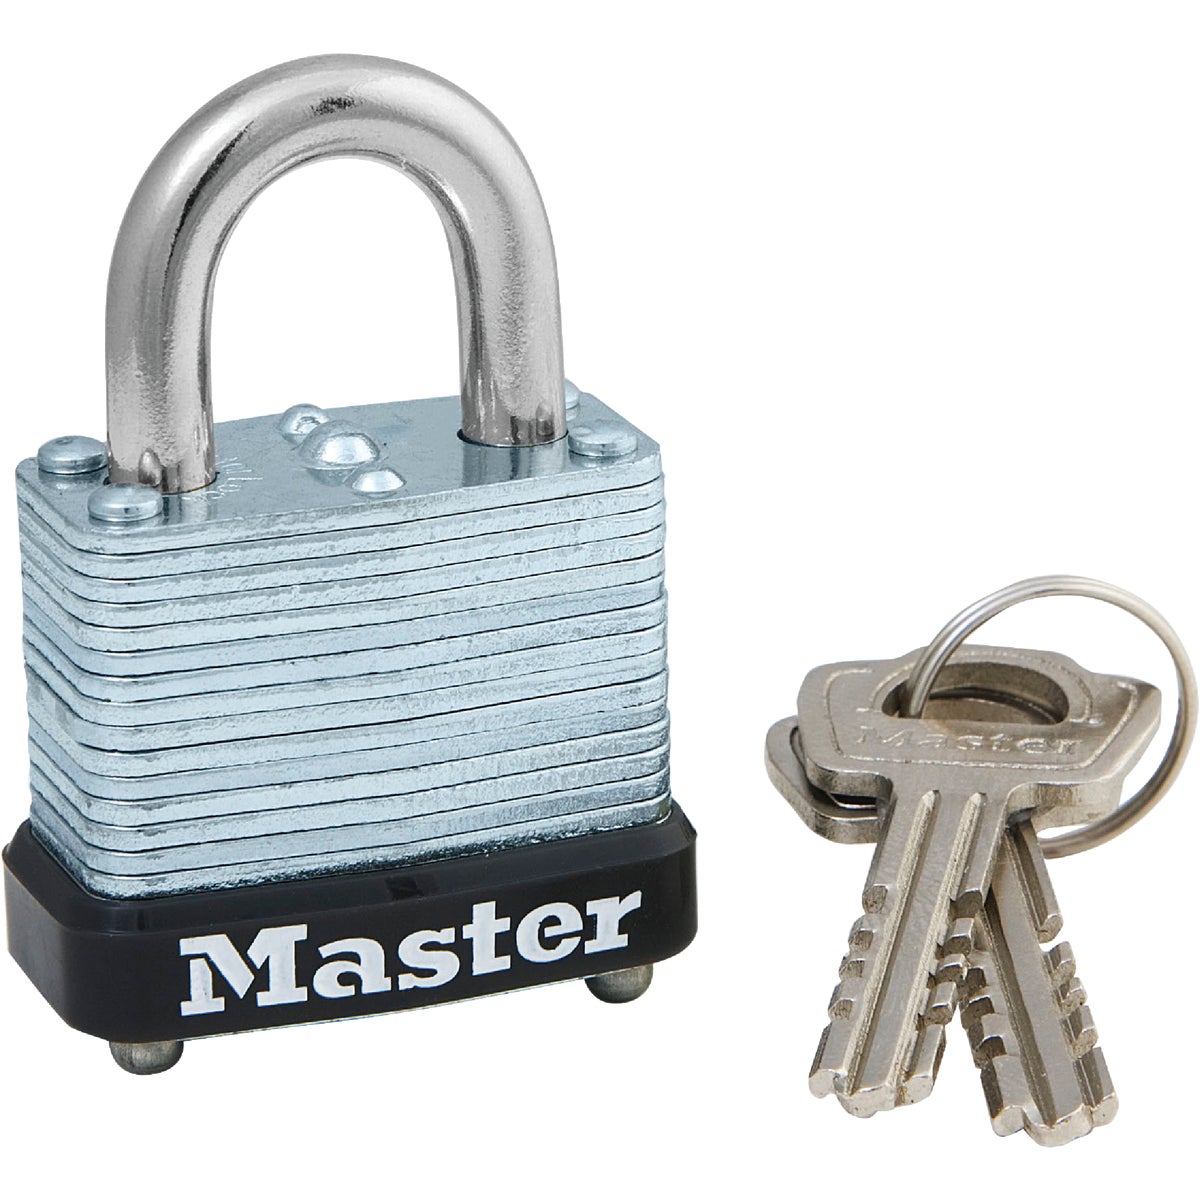 Master Lock 1-1/8 In. W. Locking Lever Warded Keyed Different Padlock